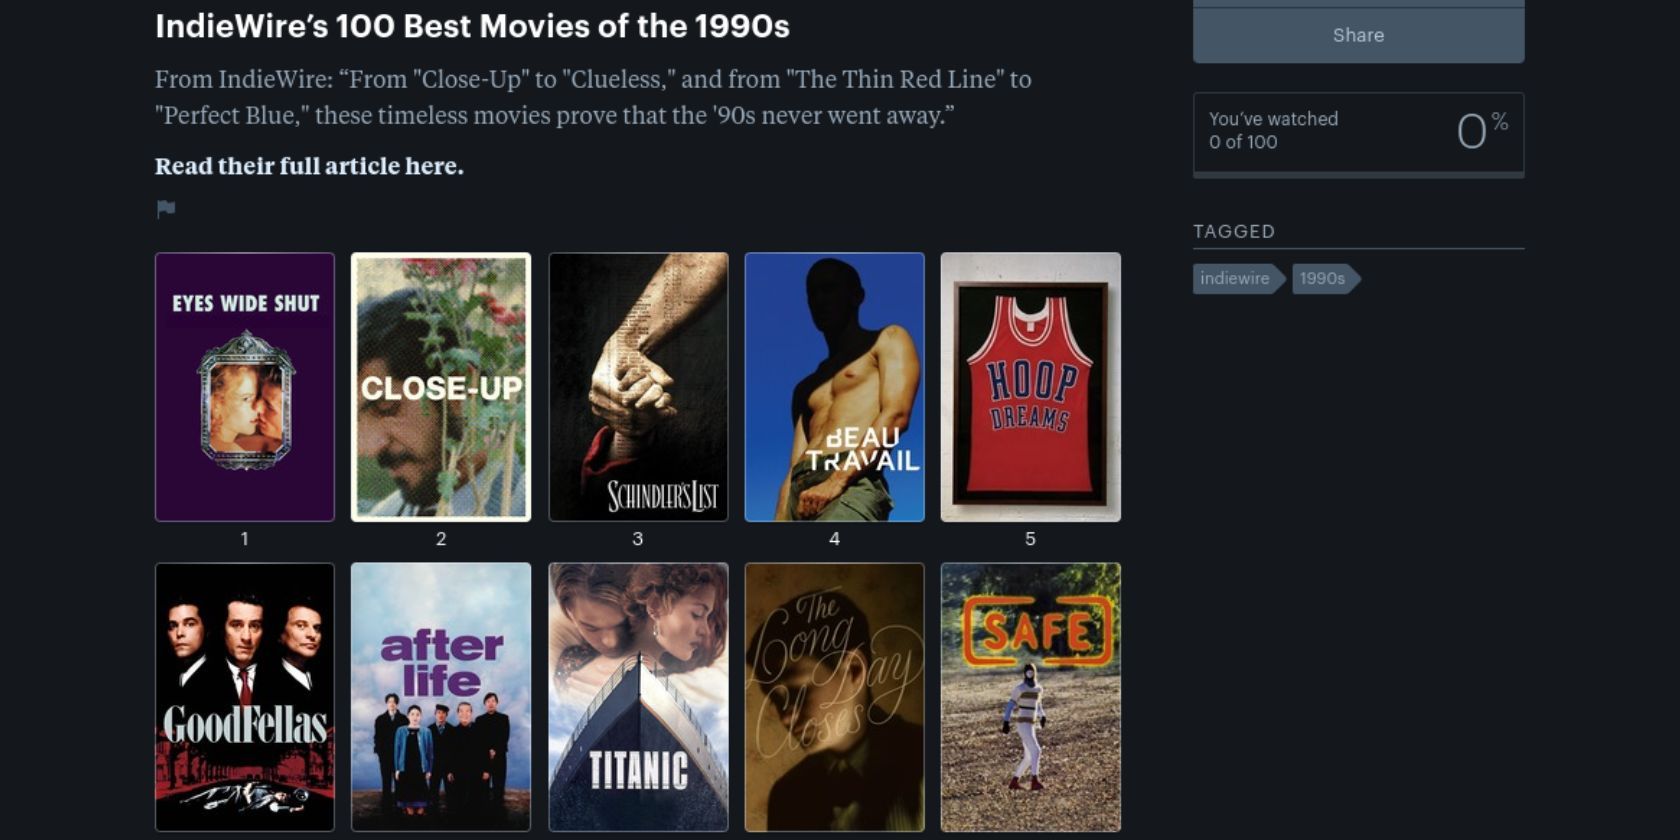 6 Tips and Tricks for Getting the Most Out Of Letterboxd